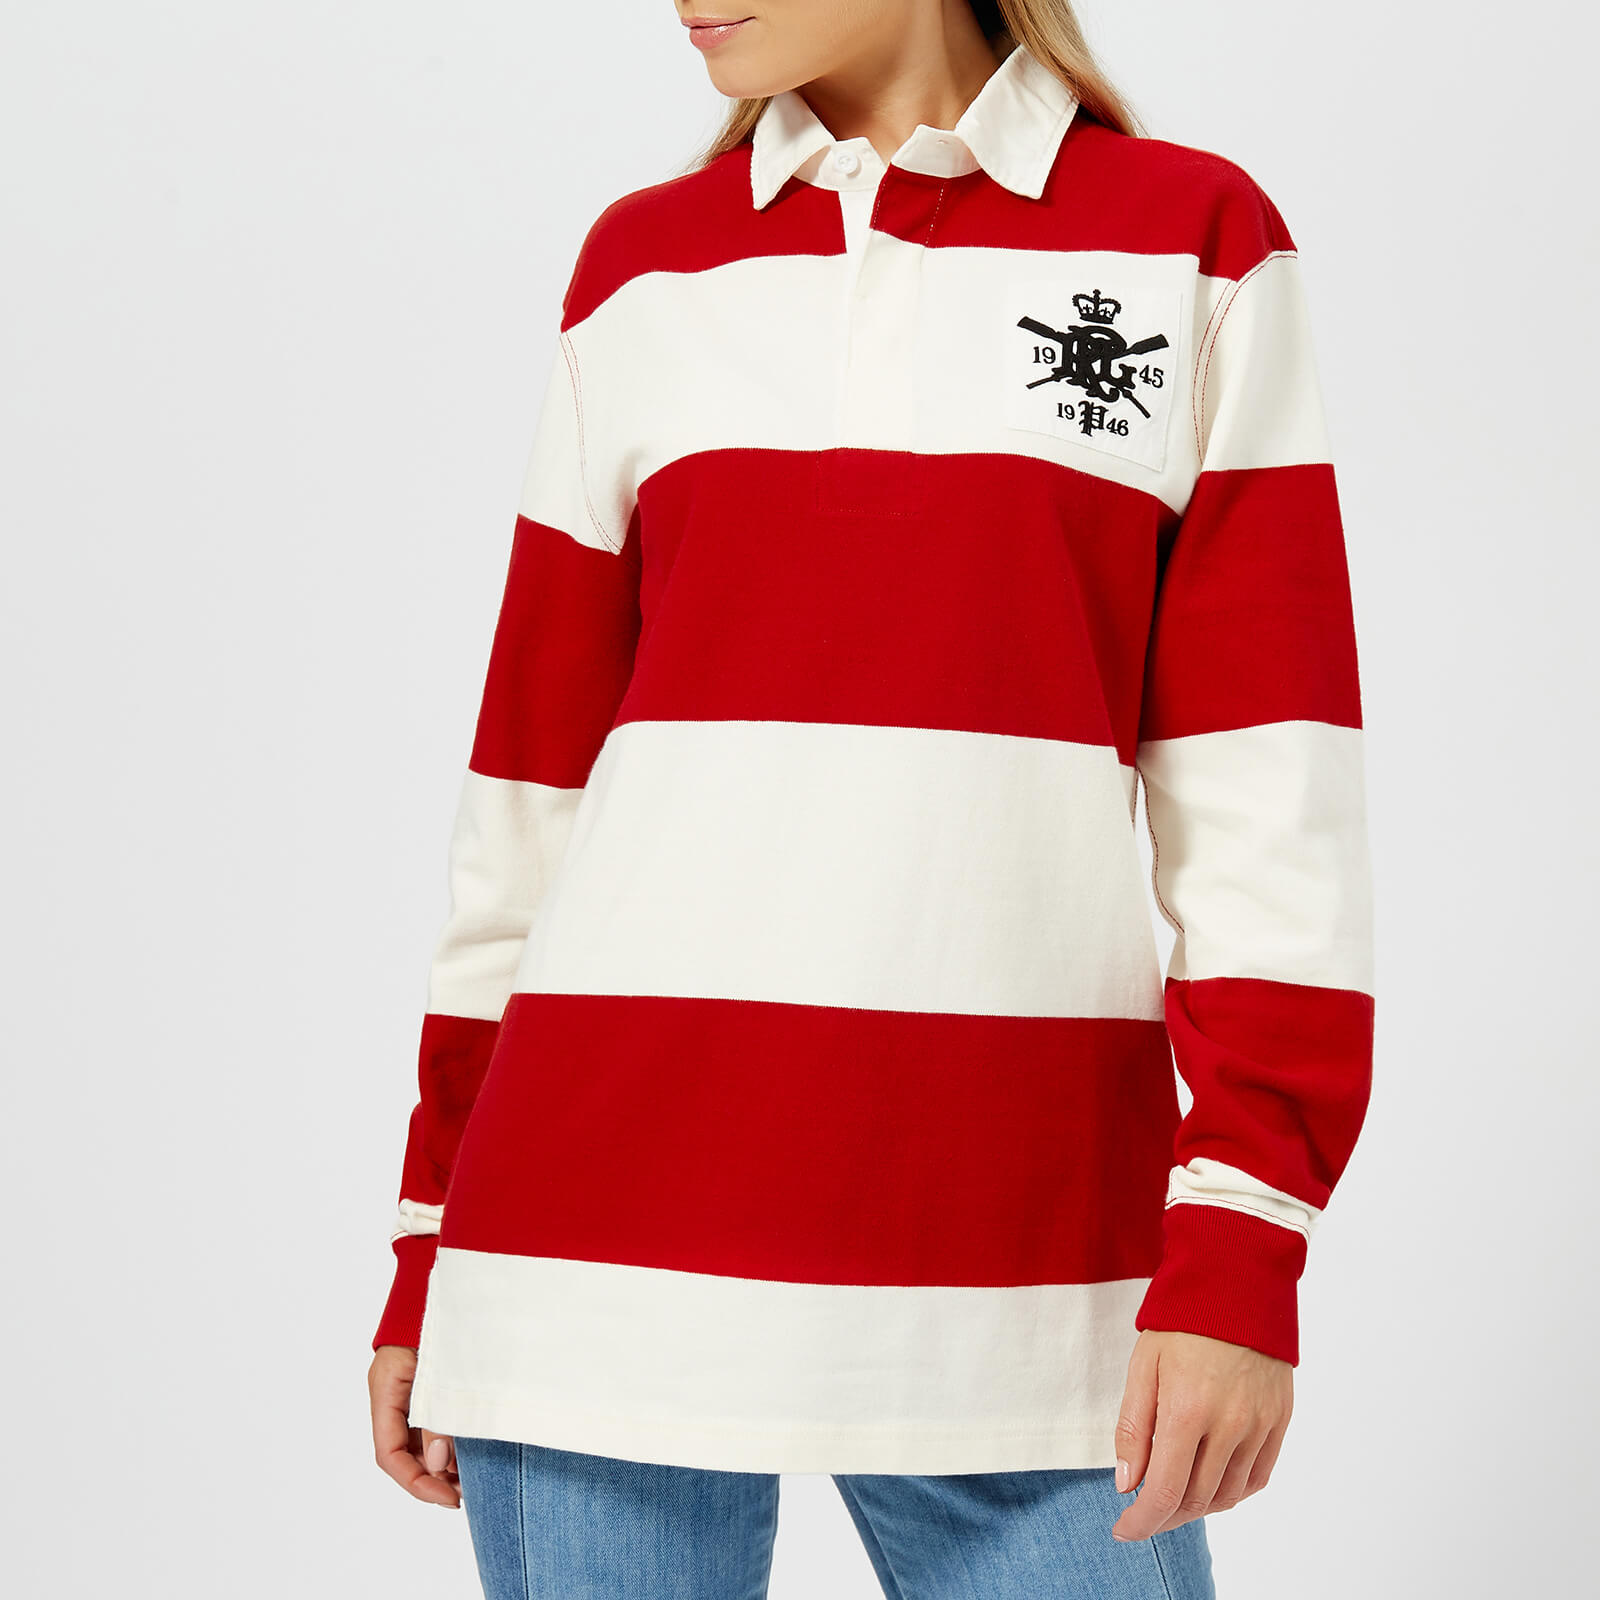 Trends For Polo Ralph Lauren Rugby Shirt Womens | Trend Style